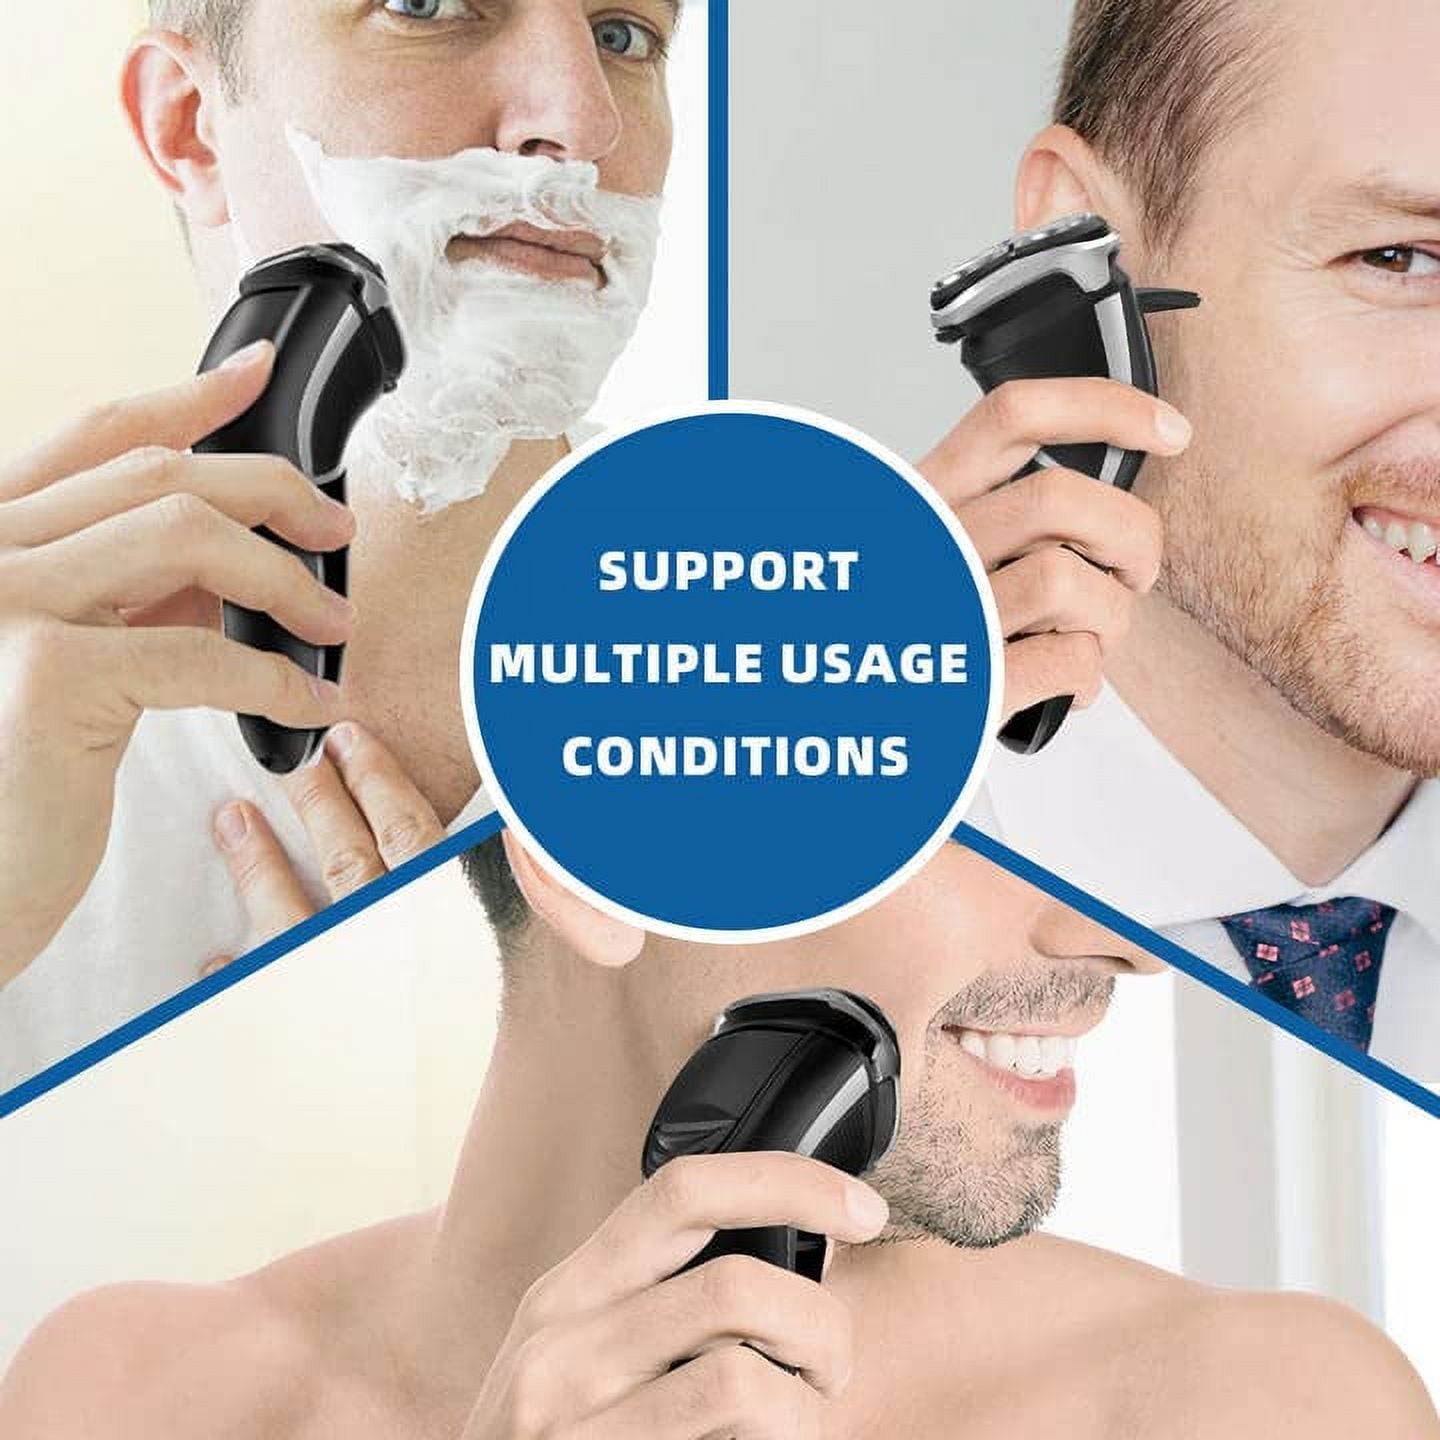 MAX-T Men's Electric Shaver - Corded and Cordless Rechargeable 3D Rotary  Shaver Razor for Men with Pop-up Sideburn Trimmer Wet and Dry Painless